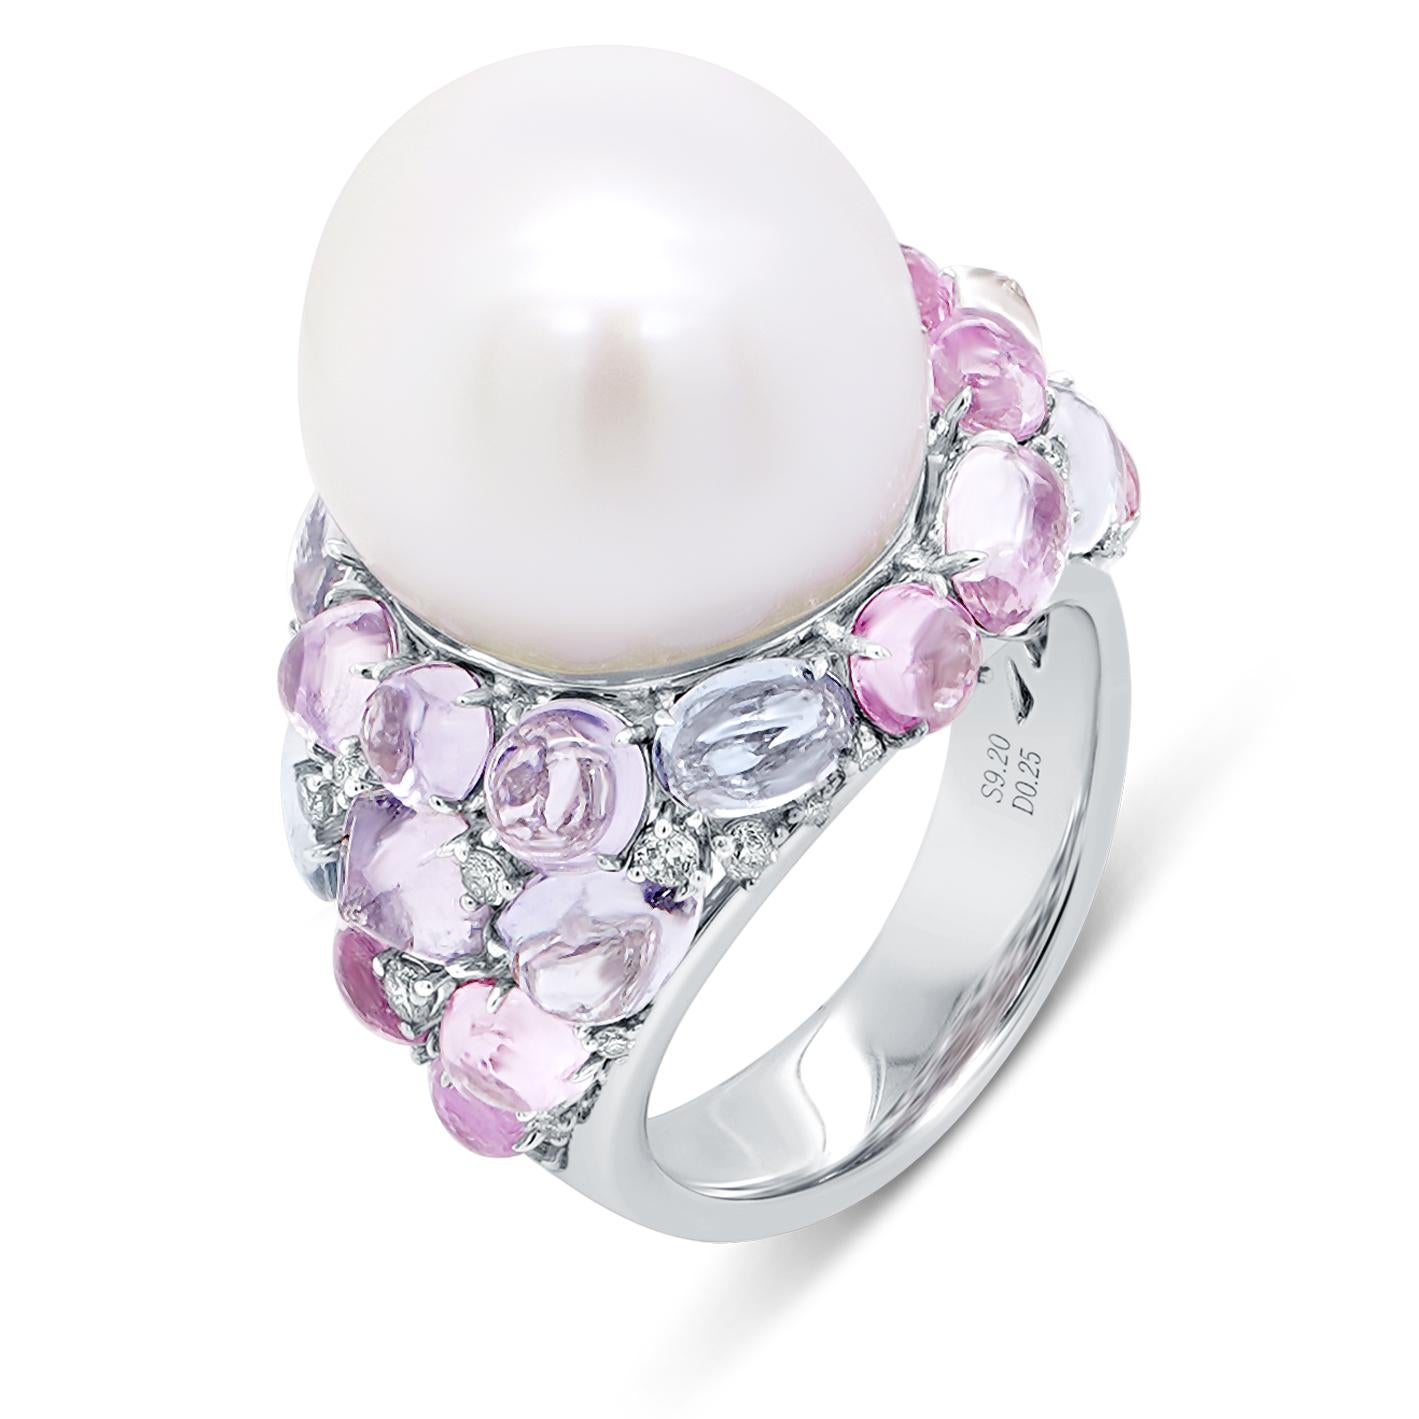 28 Carat South Sea Pearl Studded With 8 Carat No Heat Sapphire 18K Designer Ring In New Condition For Sale In Hung Hom, HK